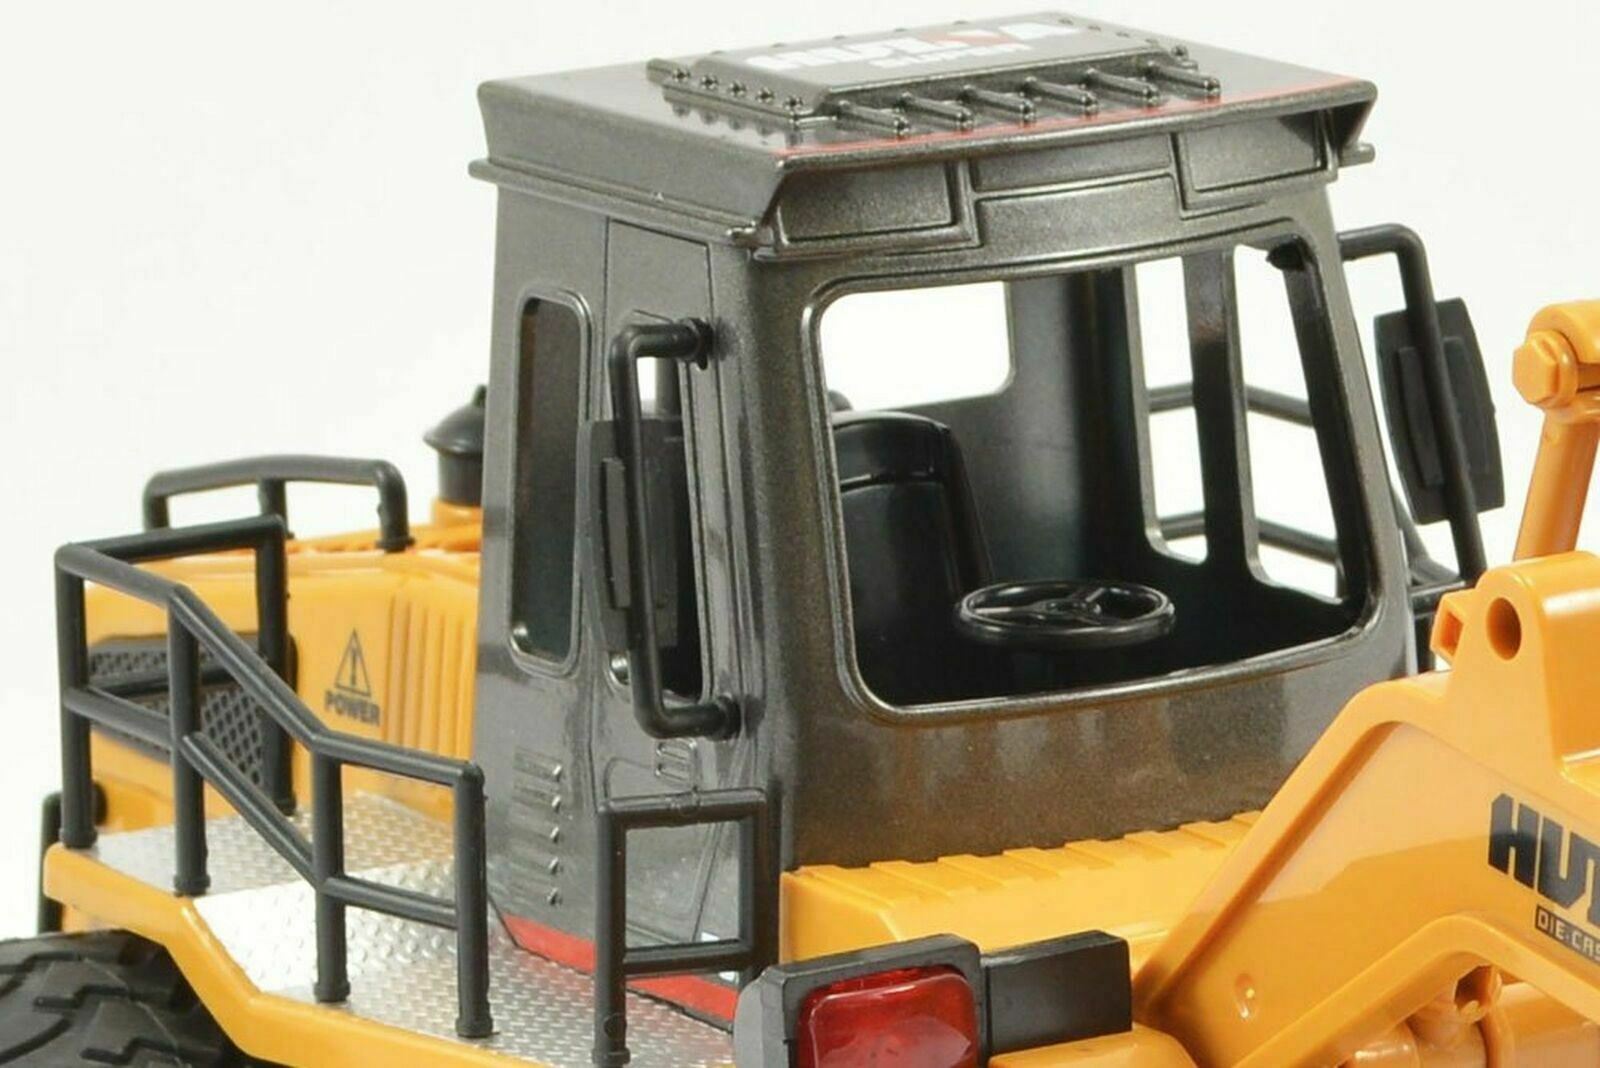 Huina CY1520 2.4G 6ch RC Bulldozer with Die Cast Bucket Construction Vehicle Toy